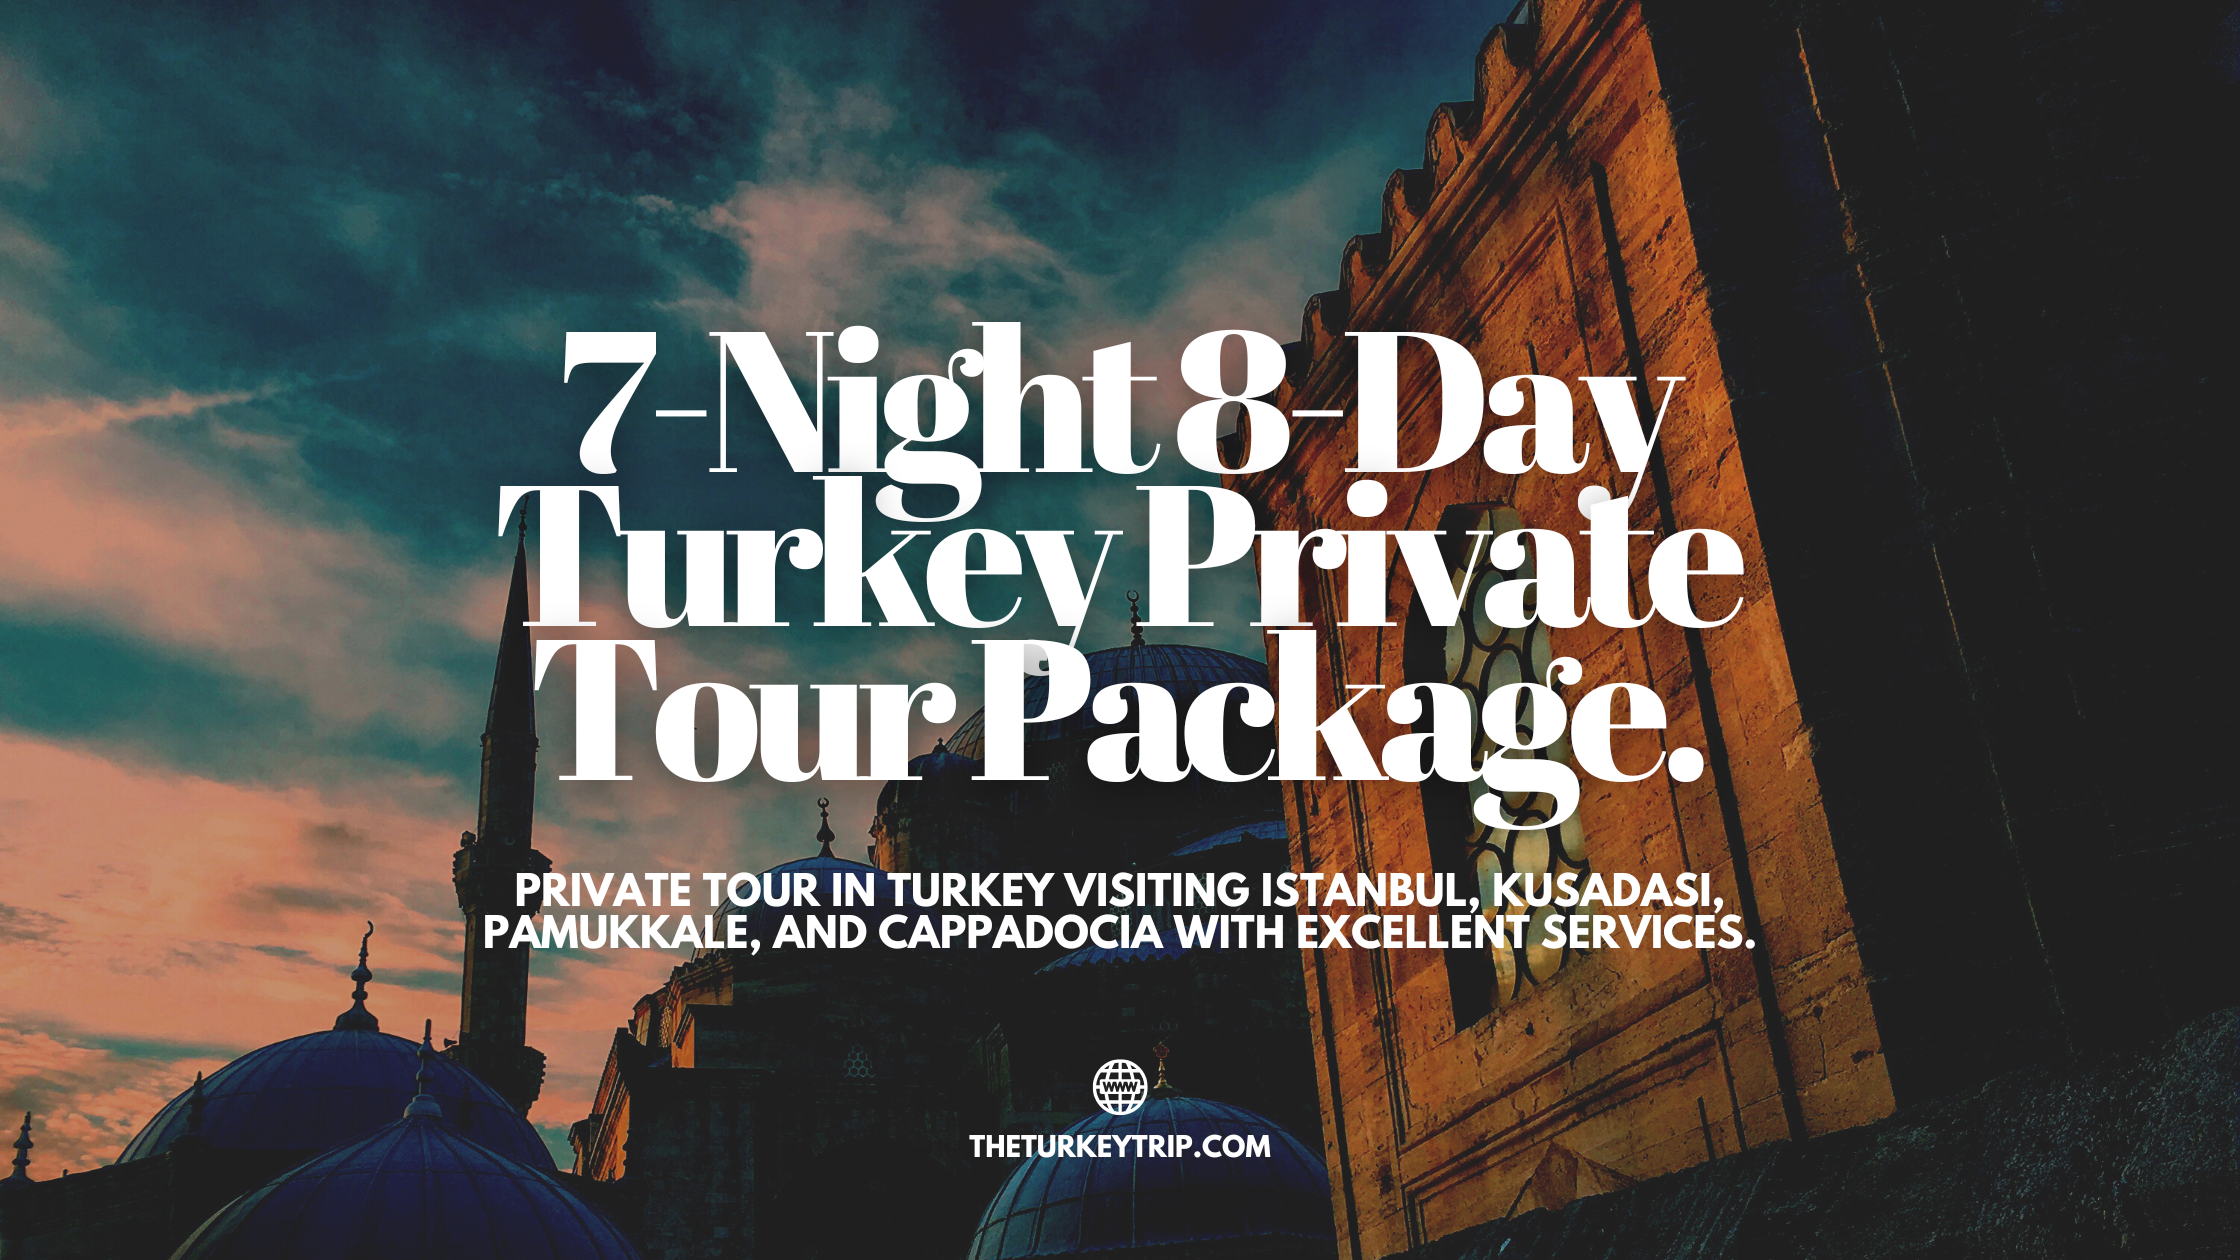 7 nights 8 days turkey private tour packages with excellent services